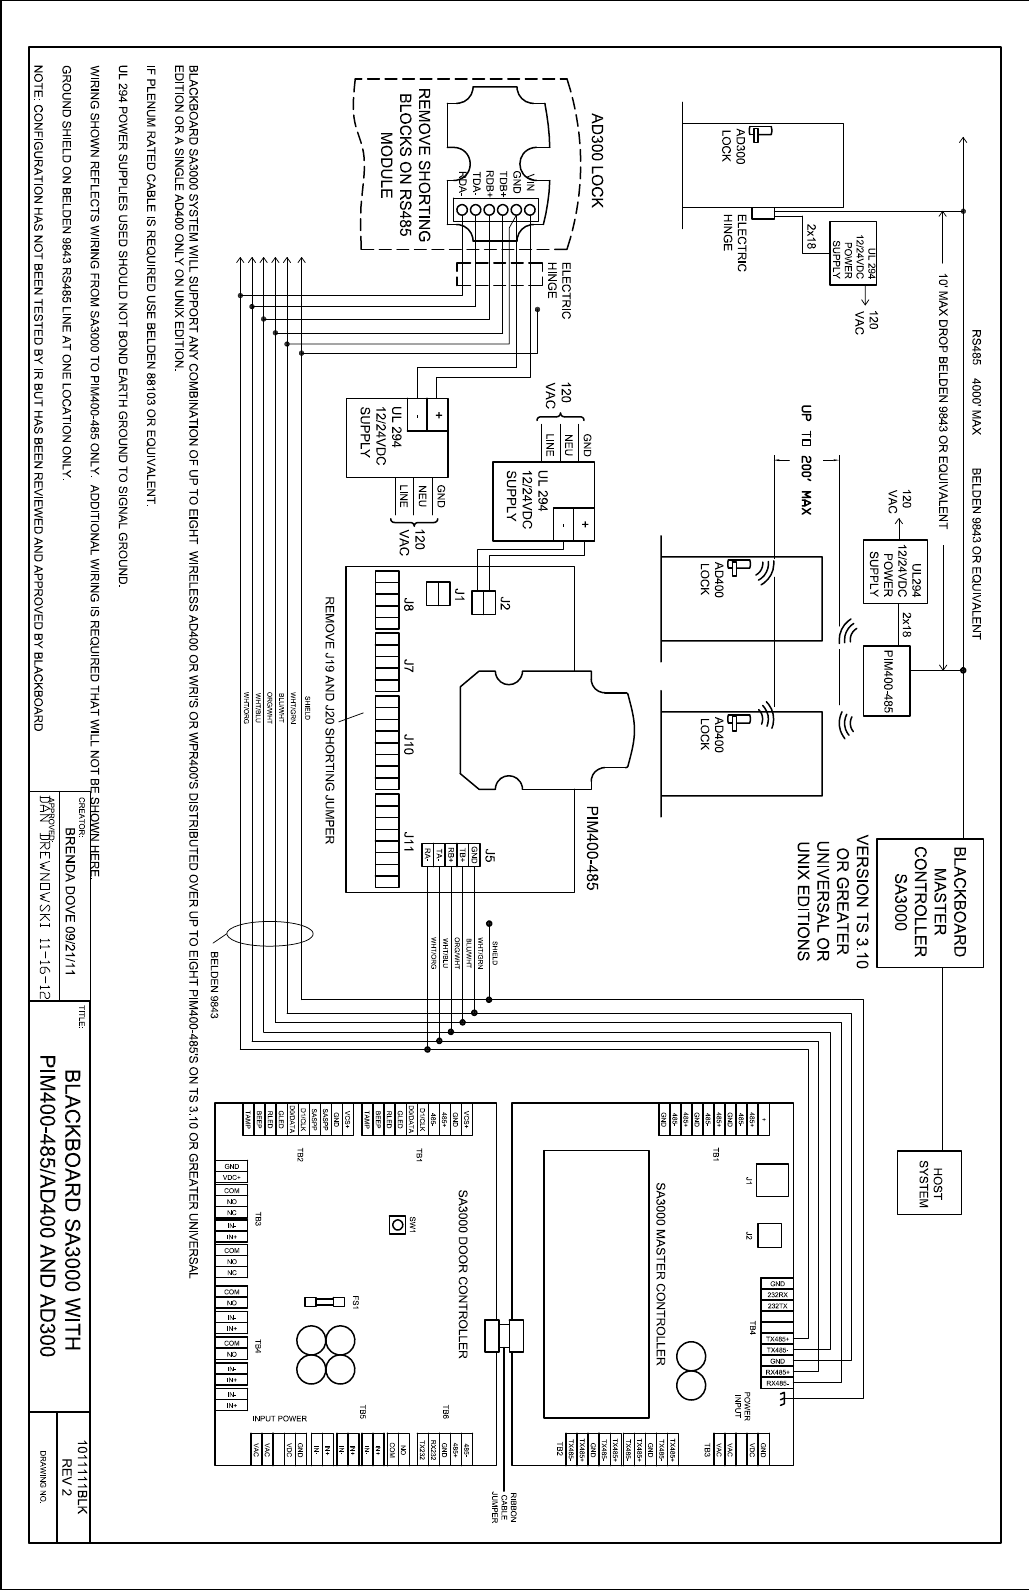 Page 1 of 1 - Schlage Electronics C AD300 AD400 Wiring Diagram Blackboard SA3000 RS485 109214